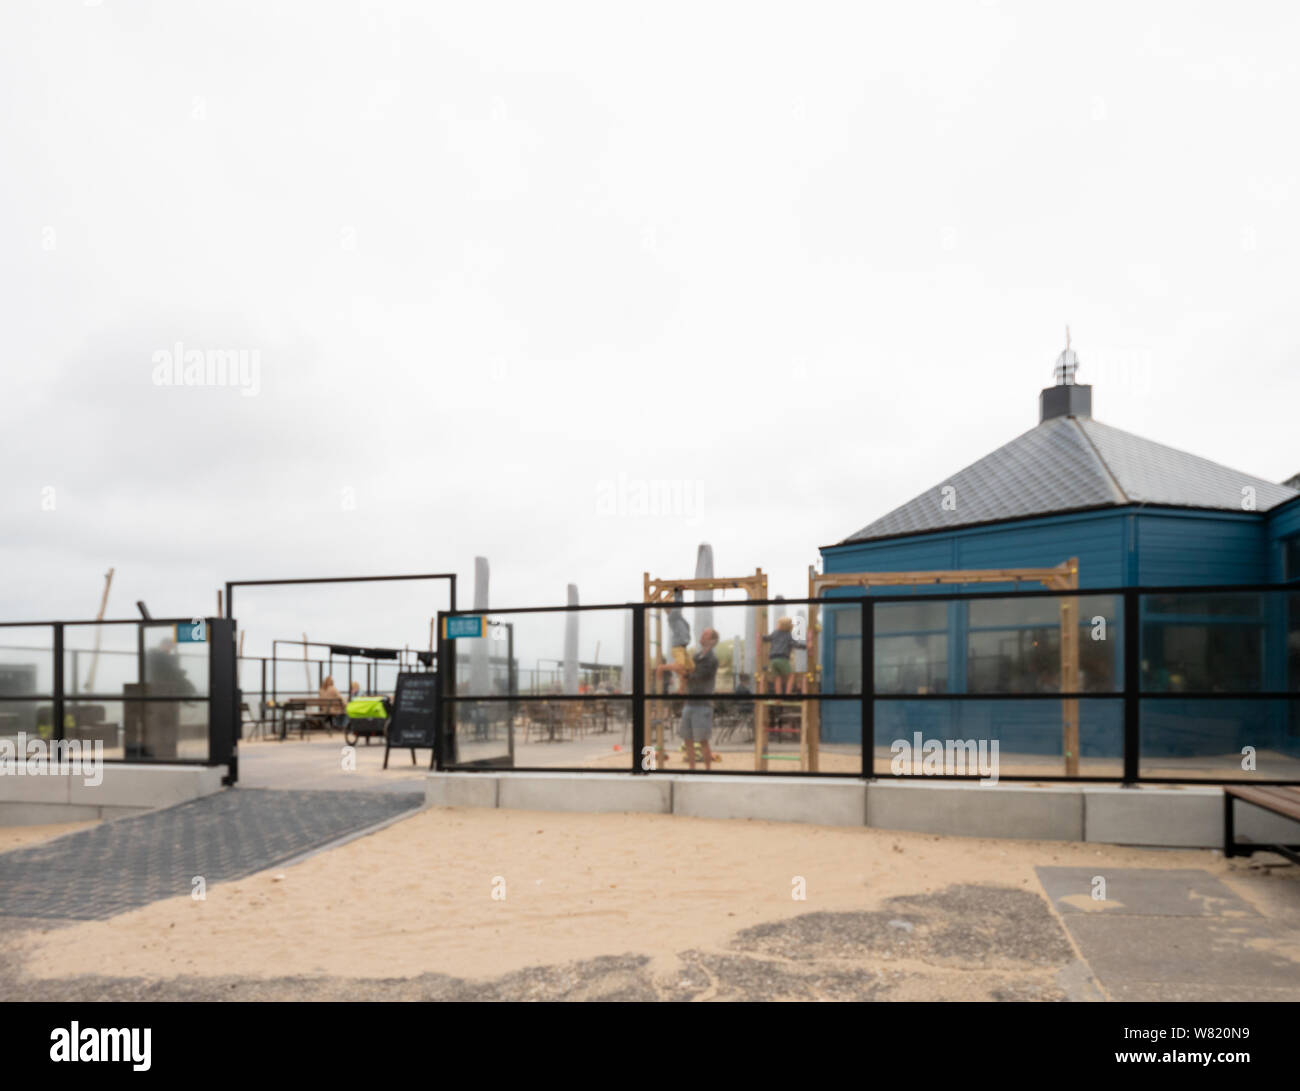 Overveen, Netherlands - Aug 16, 2018: Defocused view of restaurant playground with people silhouettes on a sandstorm day Stock Photo